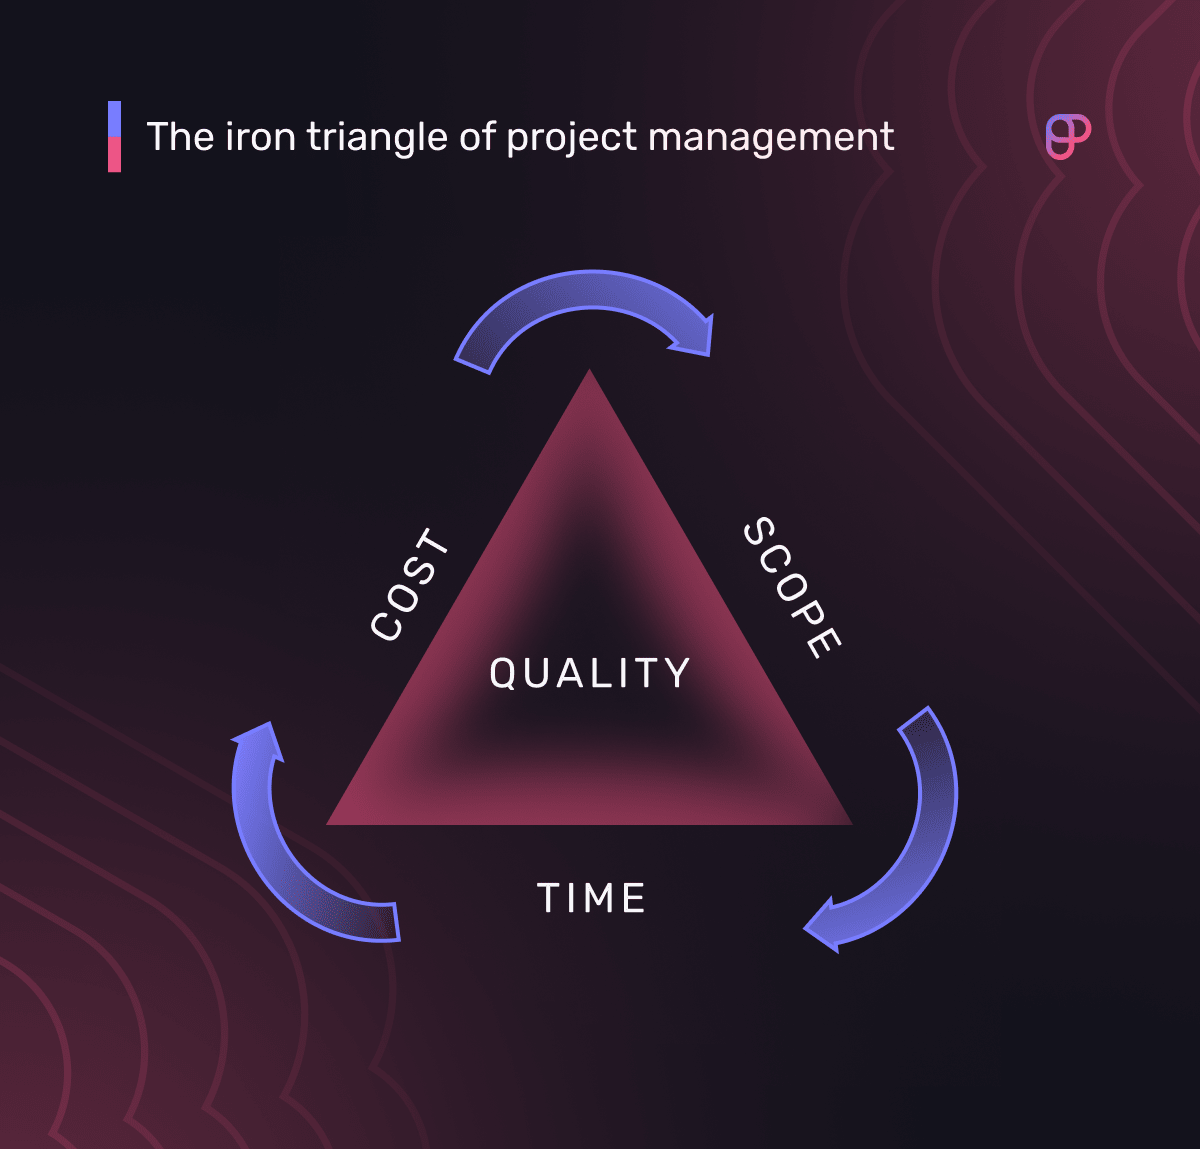 The iron triangle of project management